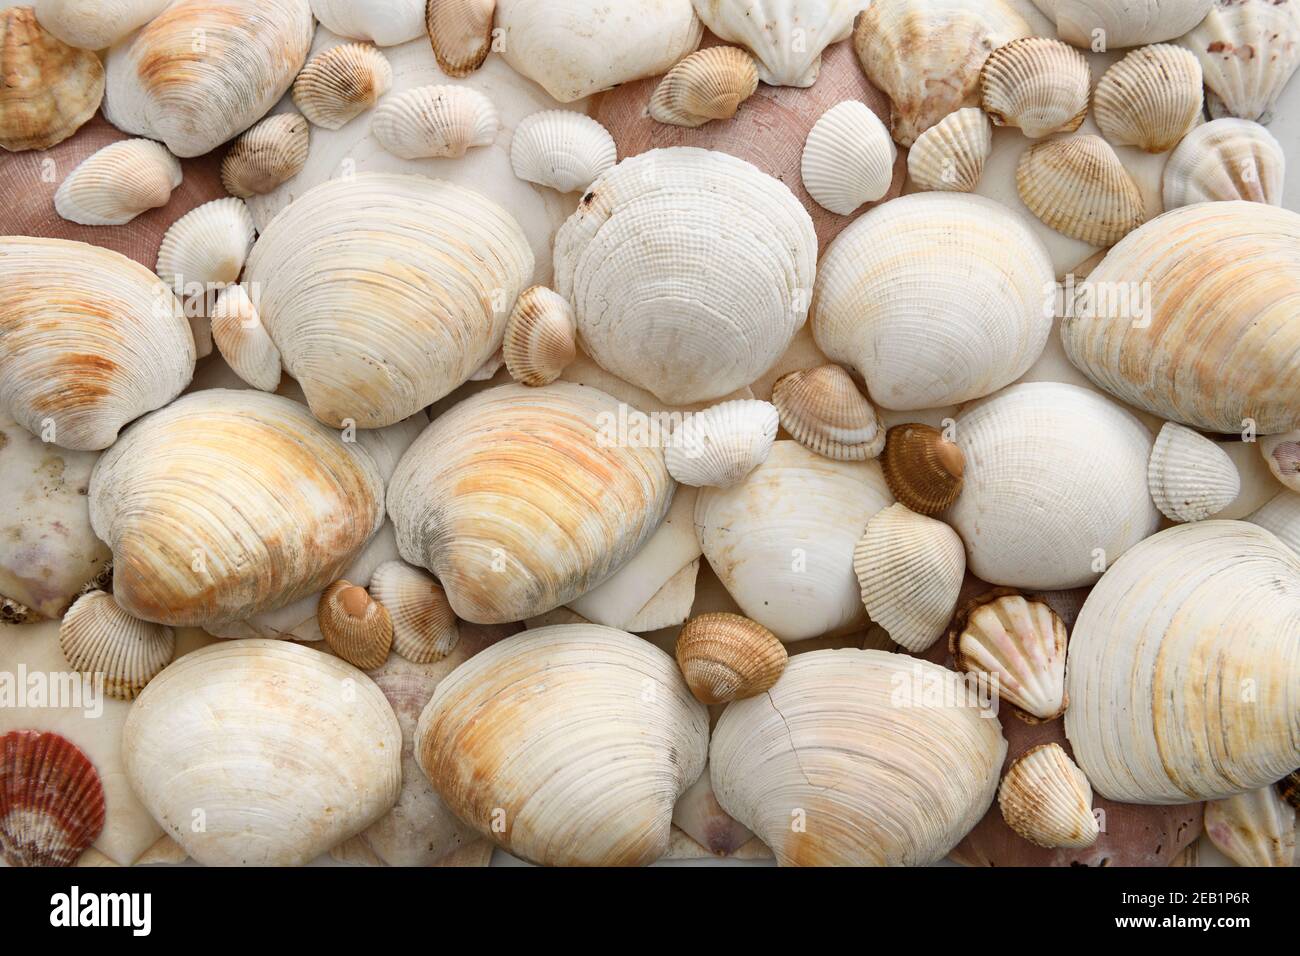 Southern Quahog and tiger lucine bivalve mollusk clams and other seashells in an abstract background pattern Stock Photo